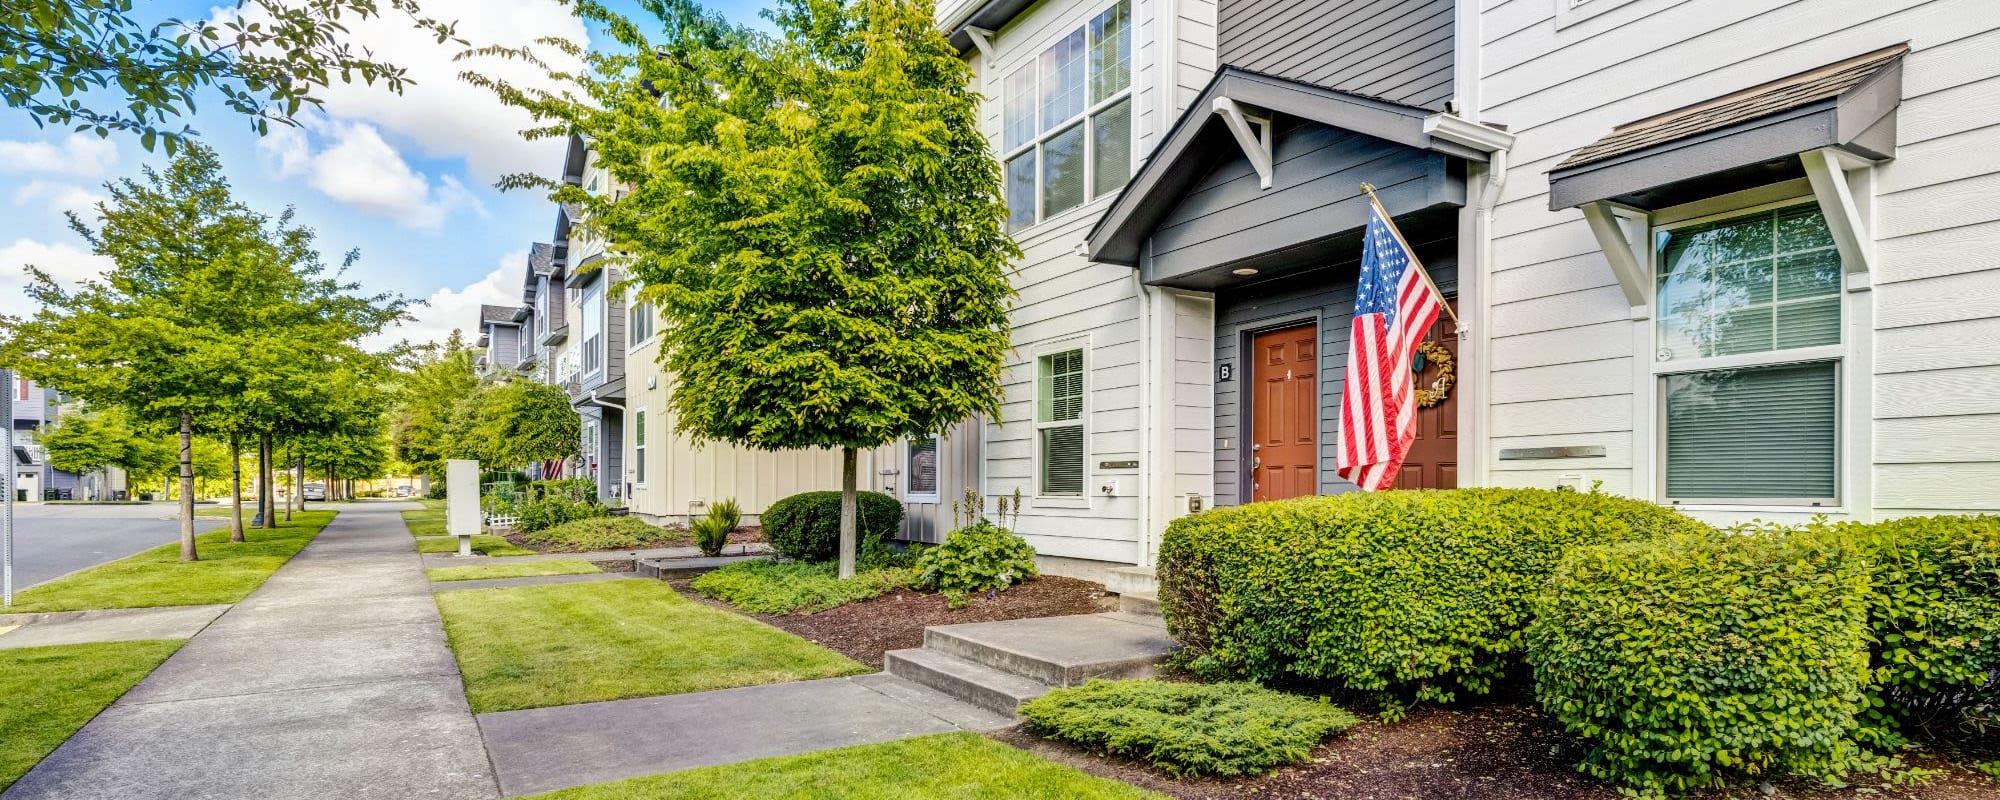 Exterior view of our townhomes at Town Center in Joint Base Lewis McChord, Washington